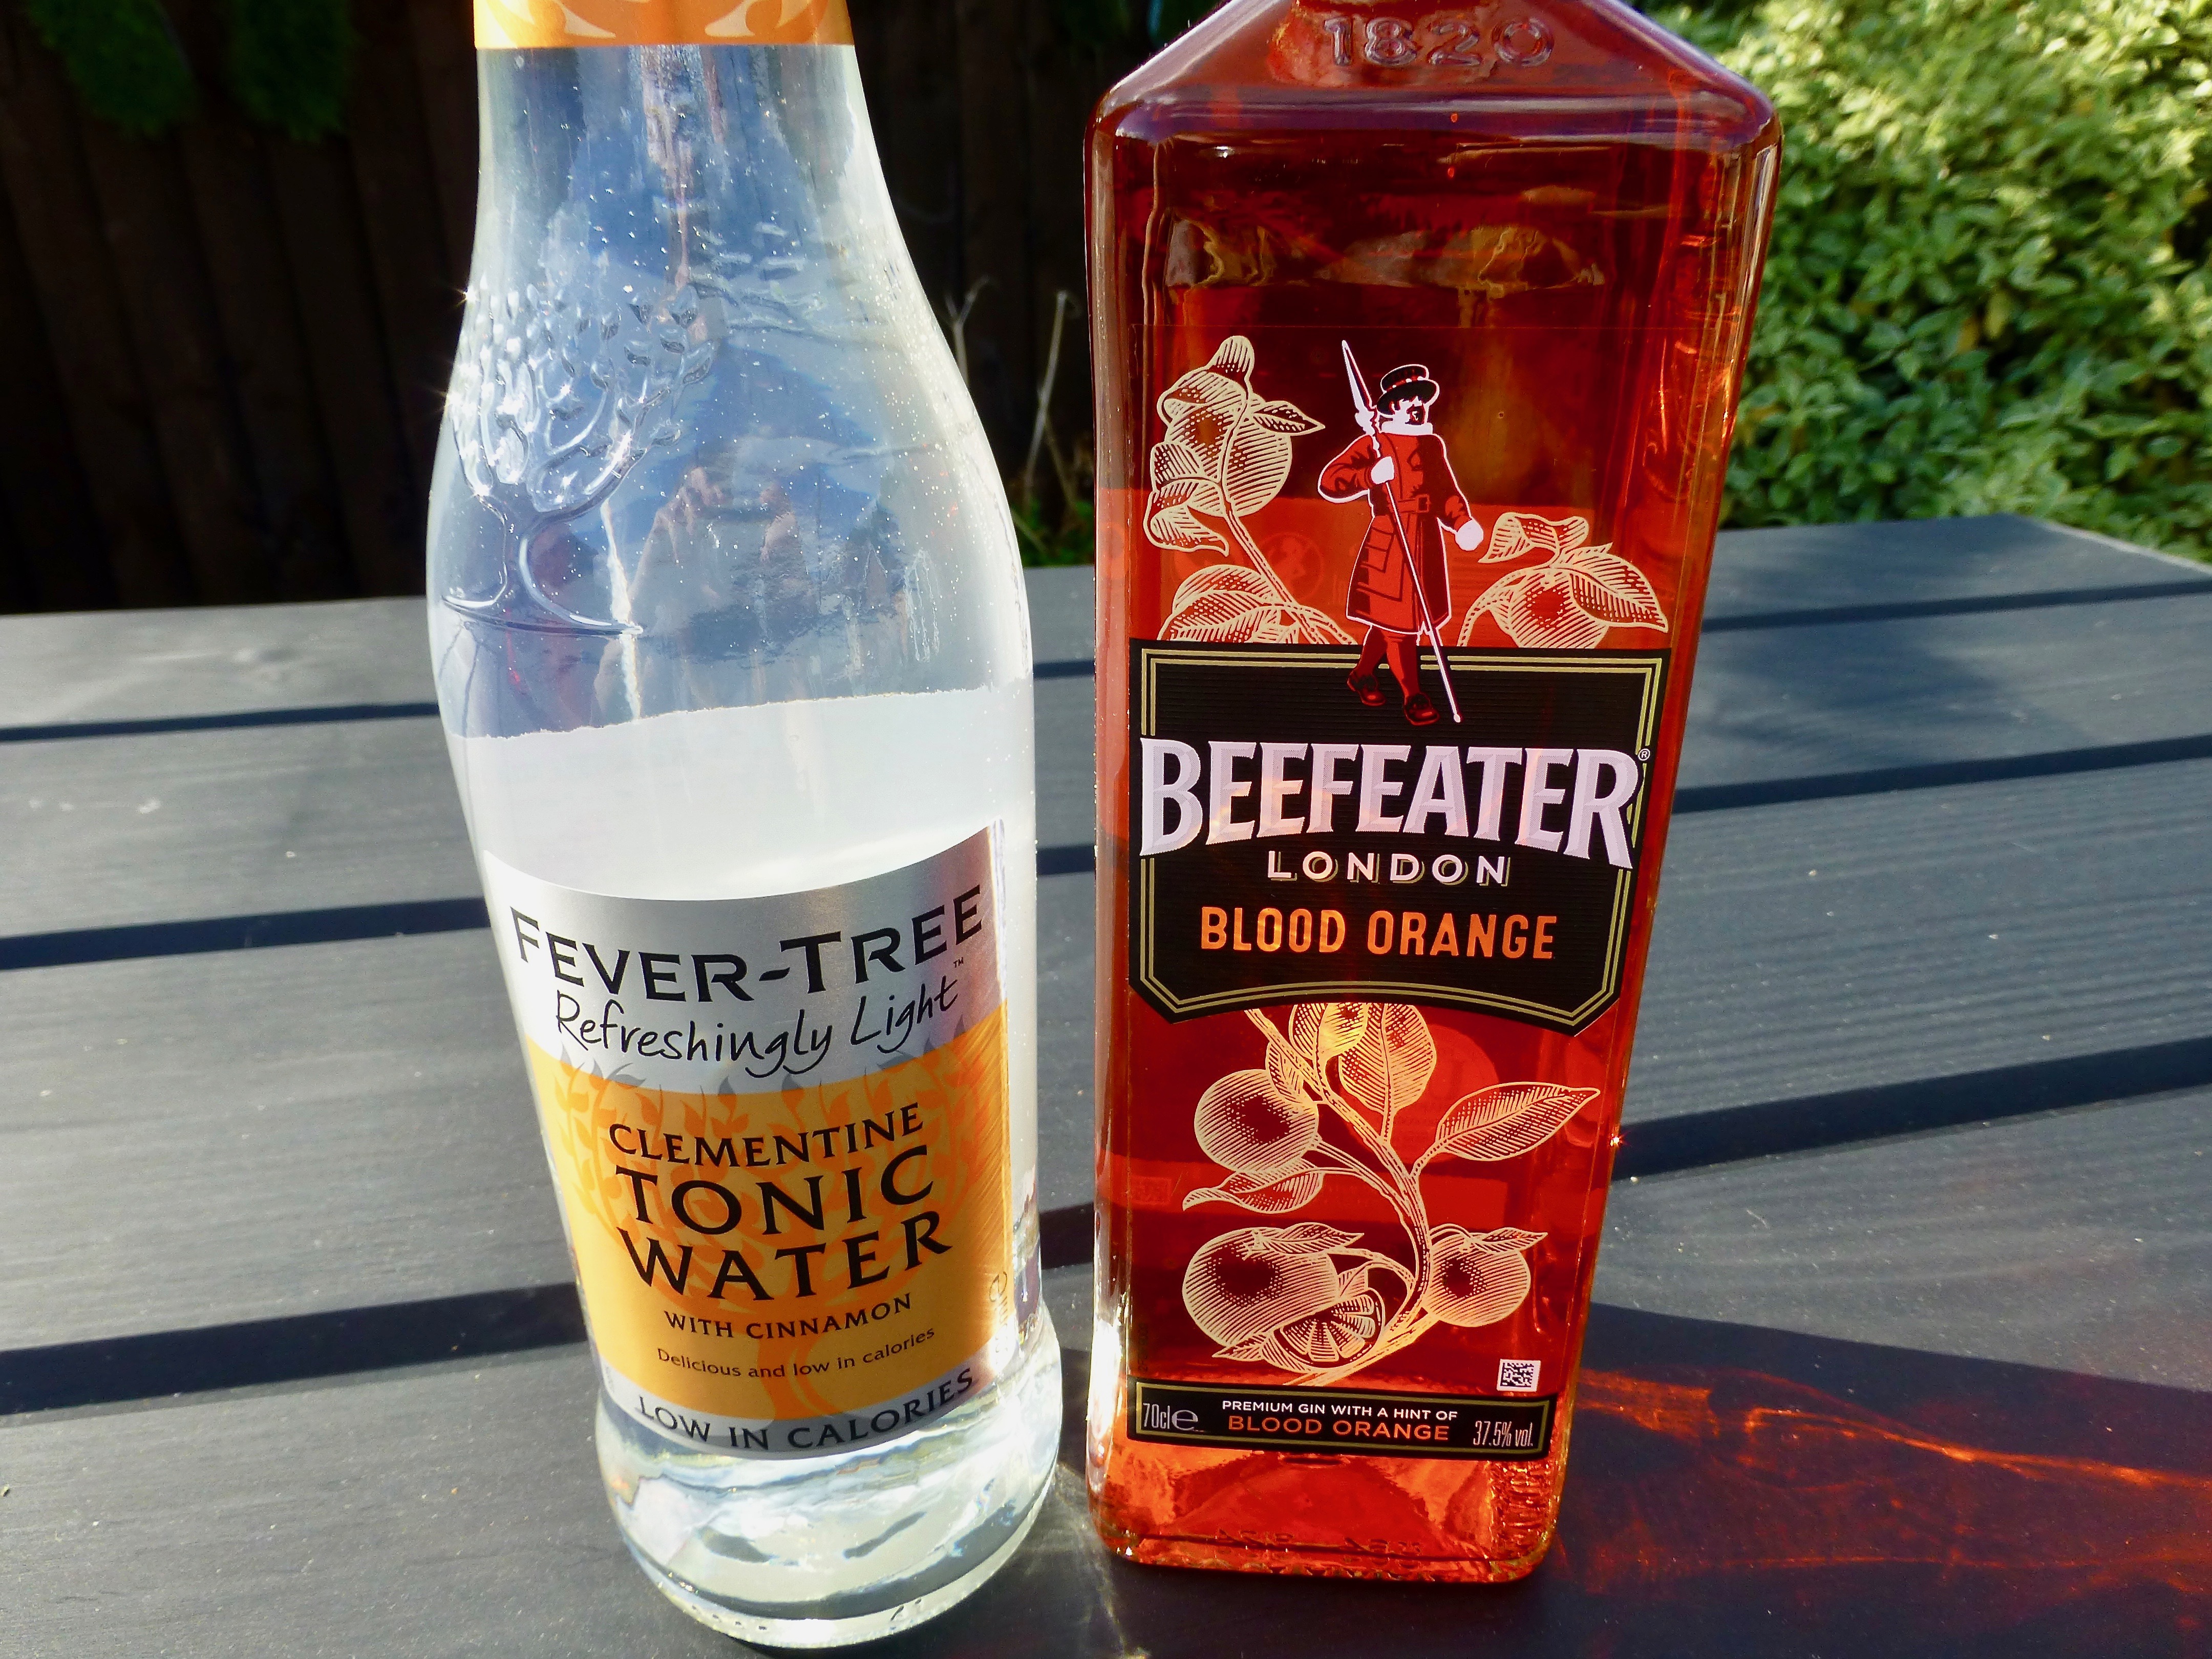 Beefeater Blood Orange Gin and Fever Tree Clementine Tonic